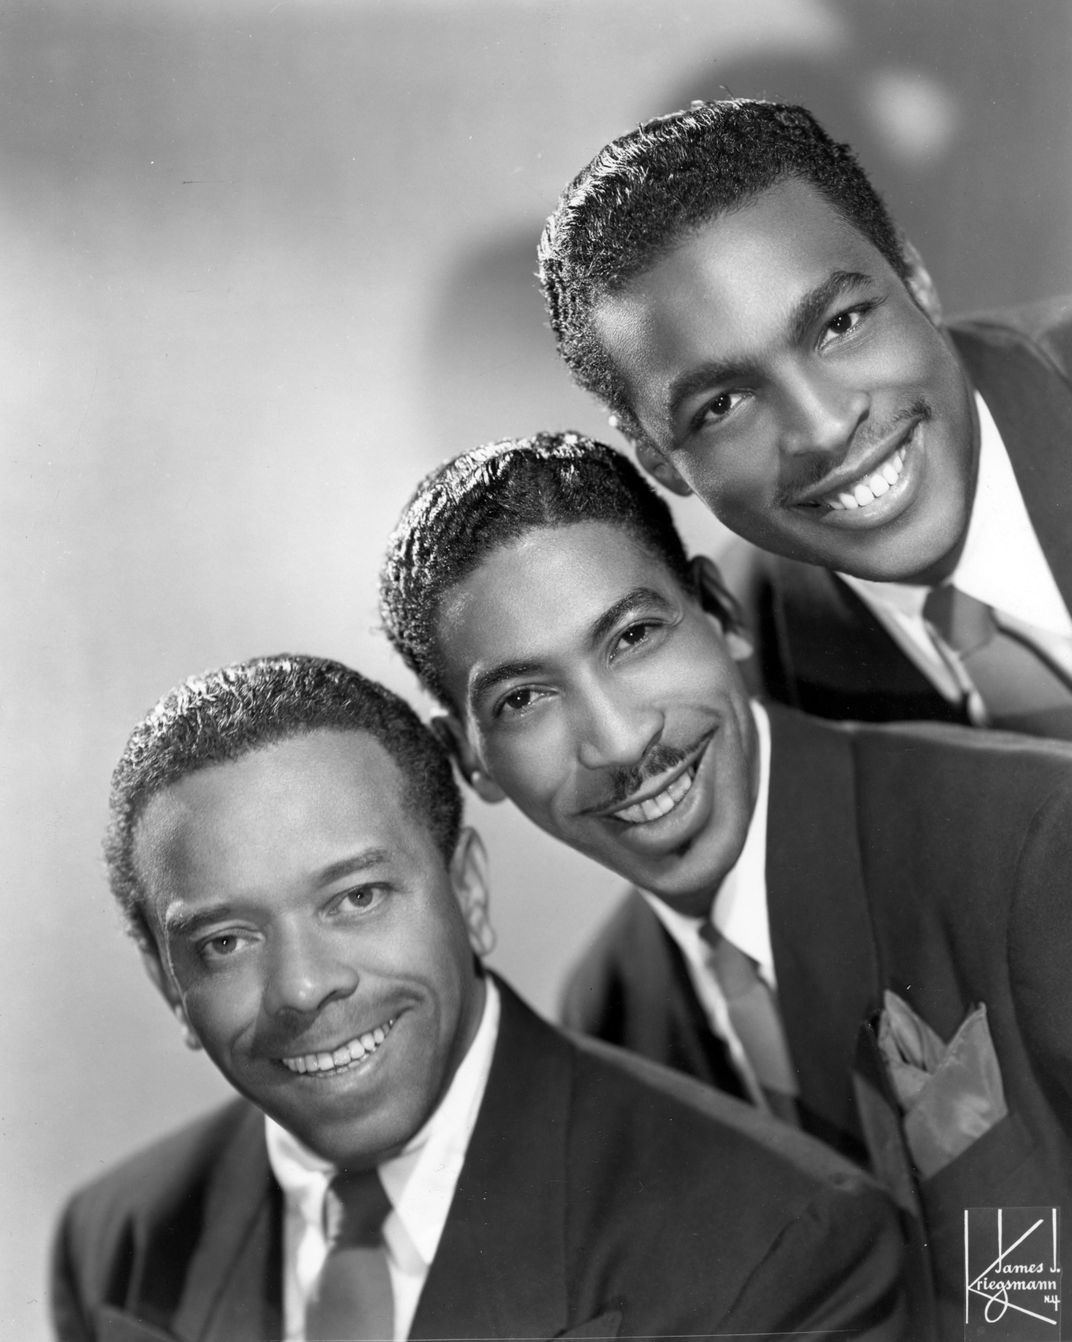 Charles Brown (far right) with fellow Blazers (from left) Johnny Moore and Eddie Williams.